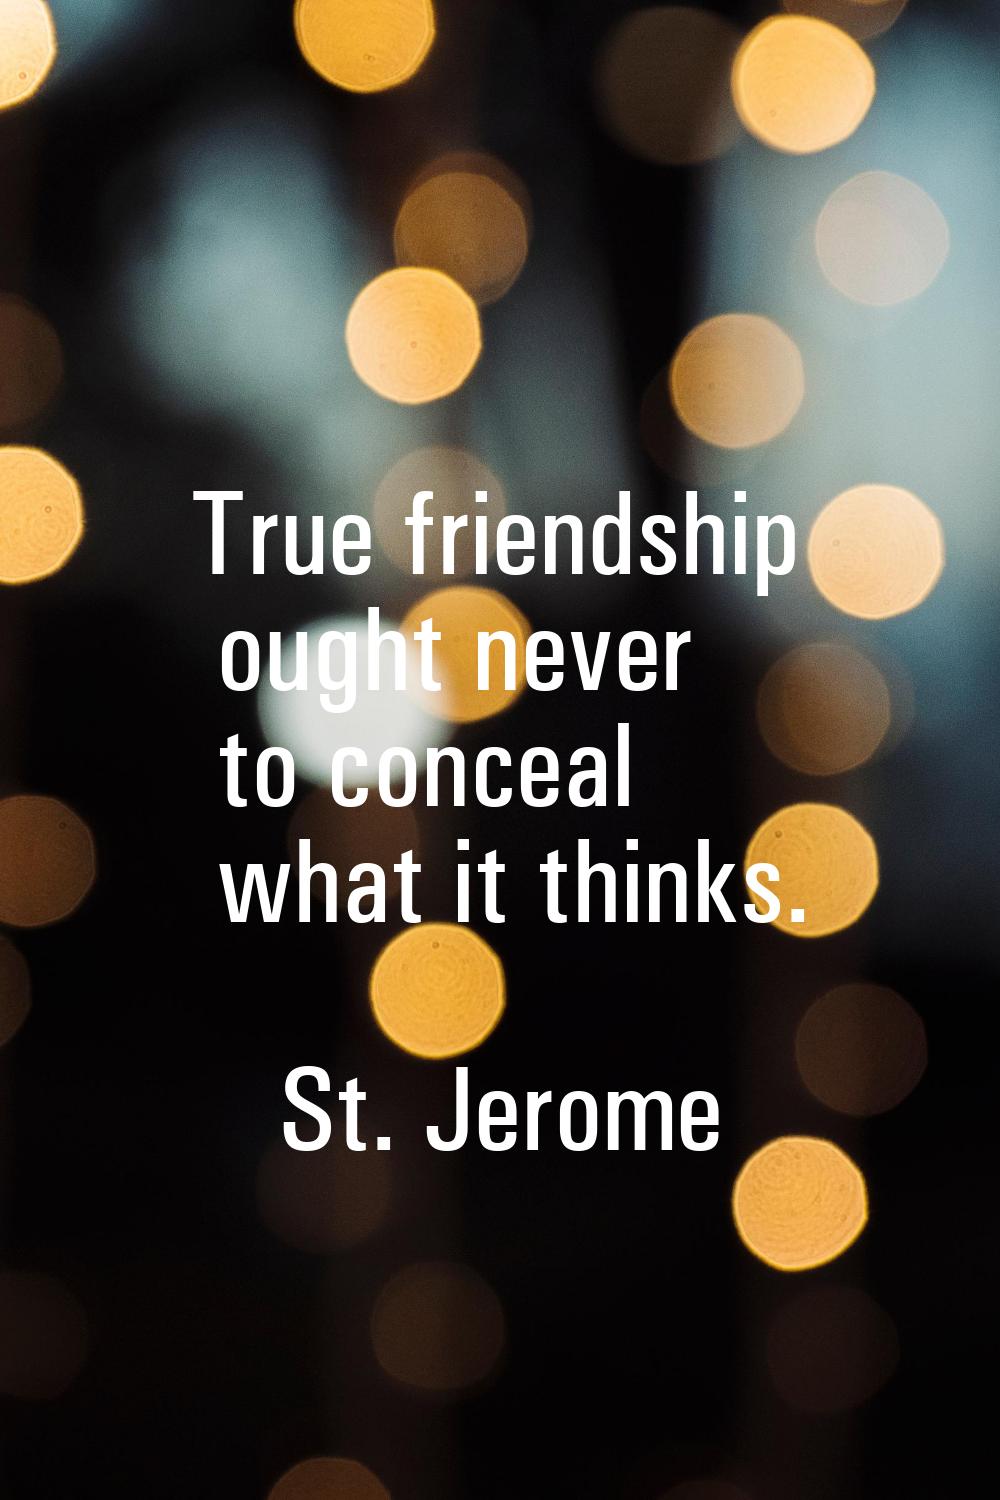 True friendship ought never to conceal what it thinks.